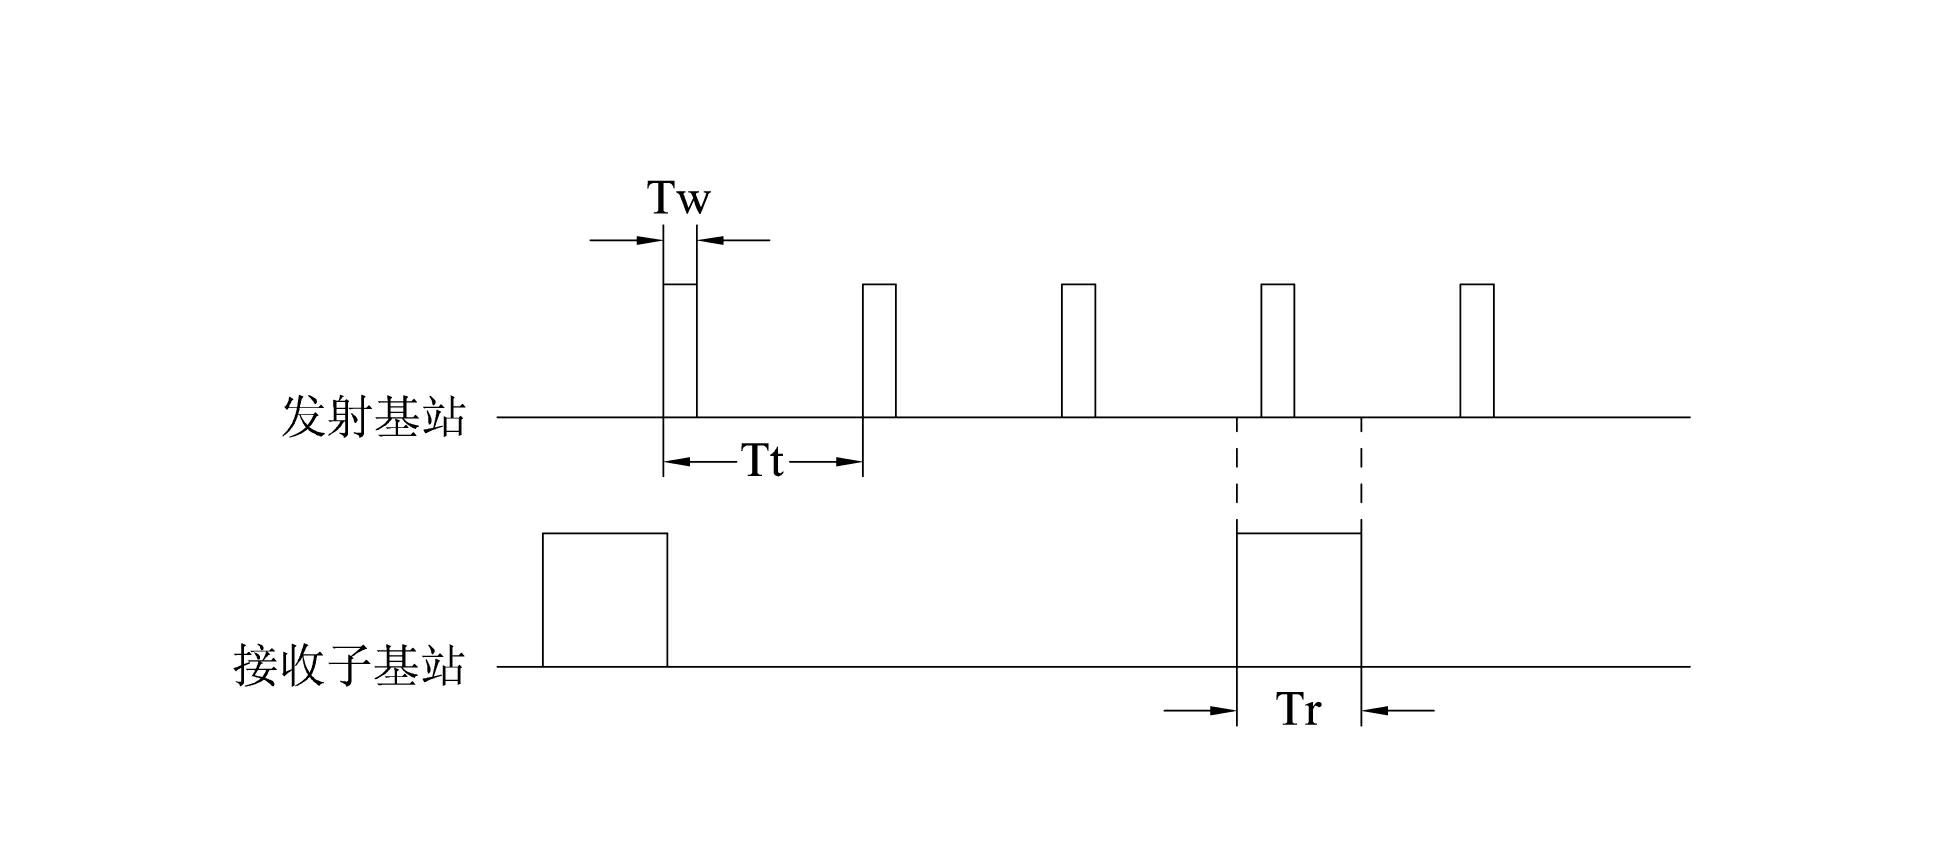 Low-power-consumption electronic tag system